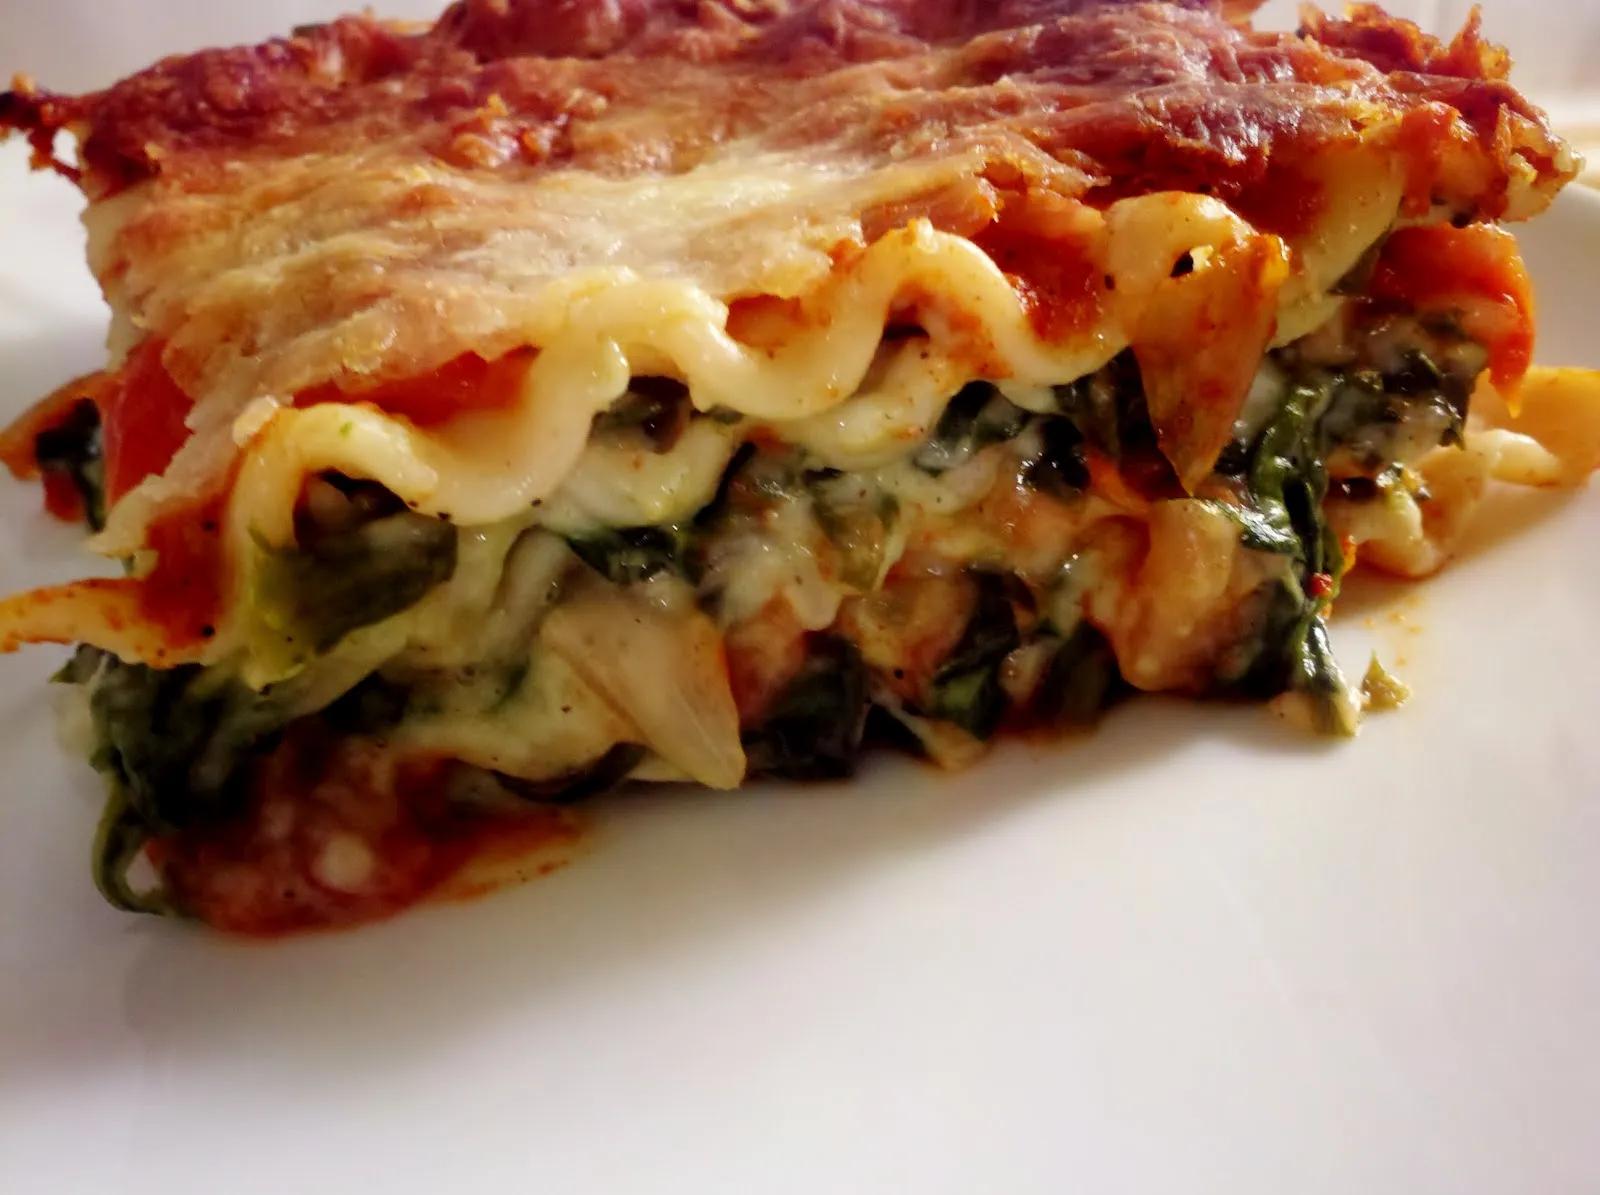 Healthy, One Recipe At a Time...: Spinach Lasagna